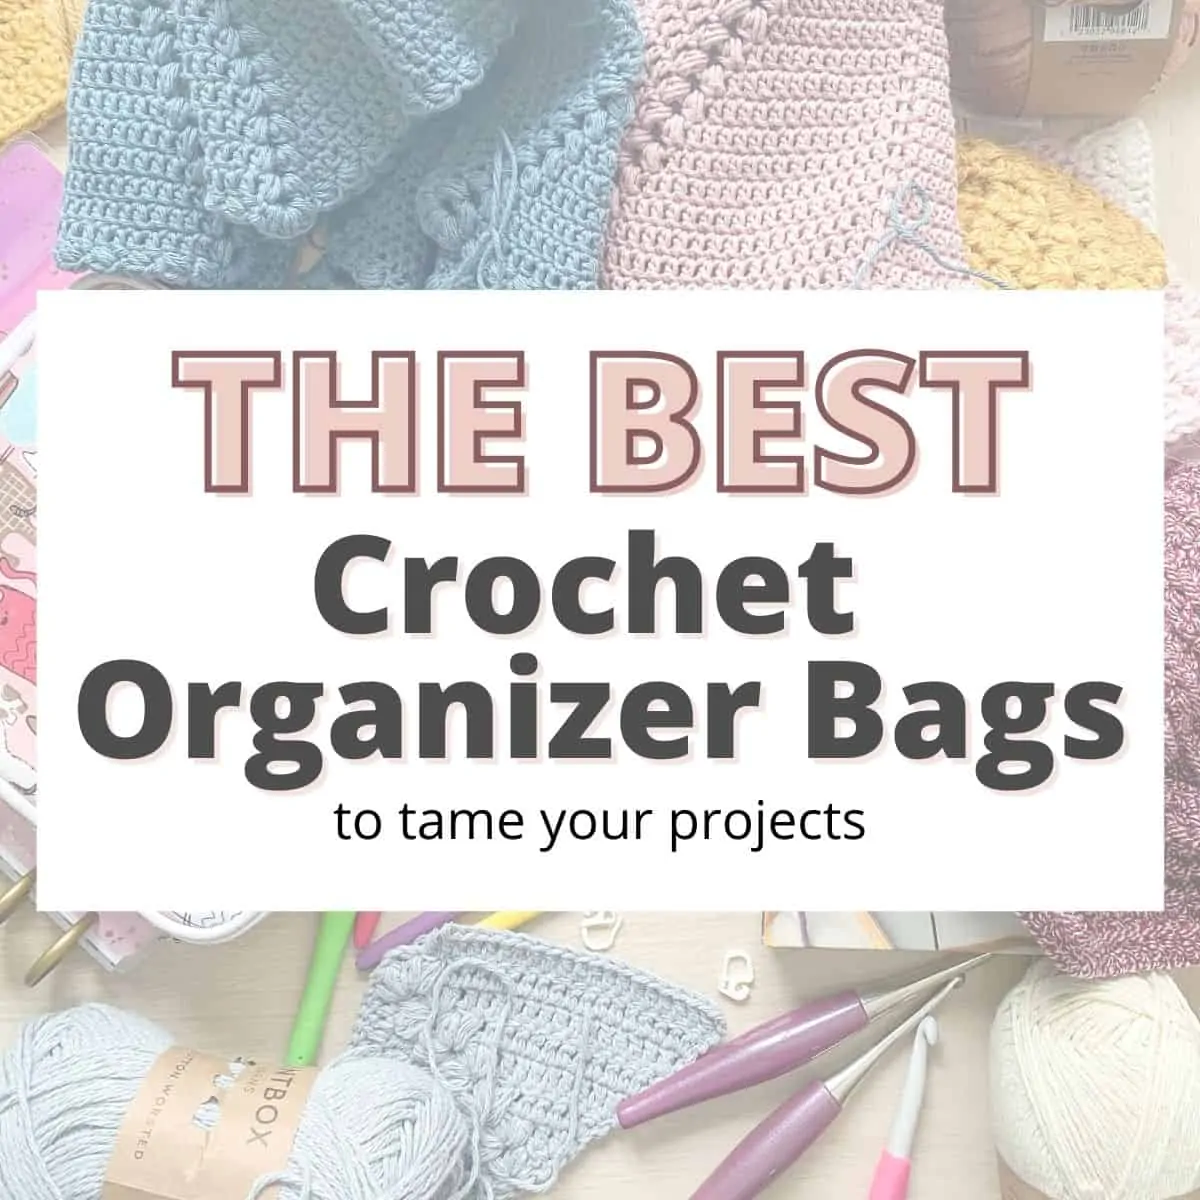 10 Must-Have Crochet Tools + Notions from a Pro Pattern Designer